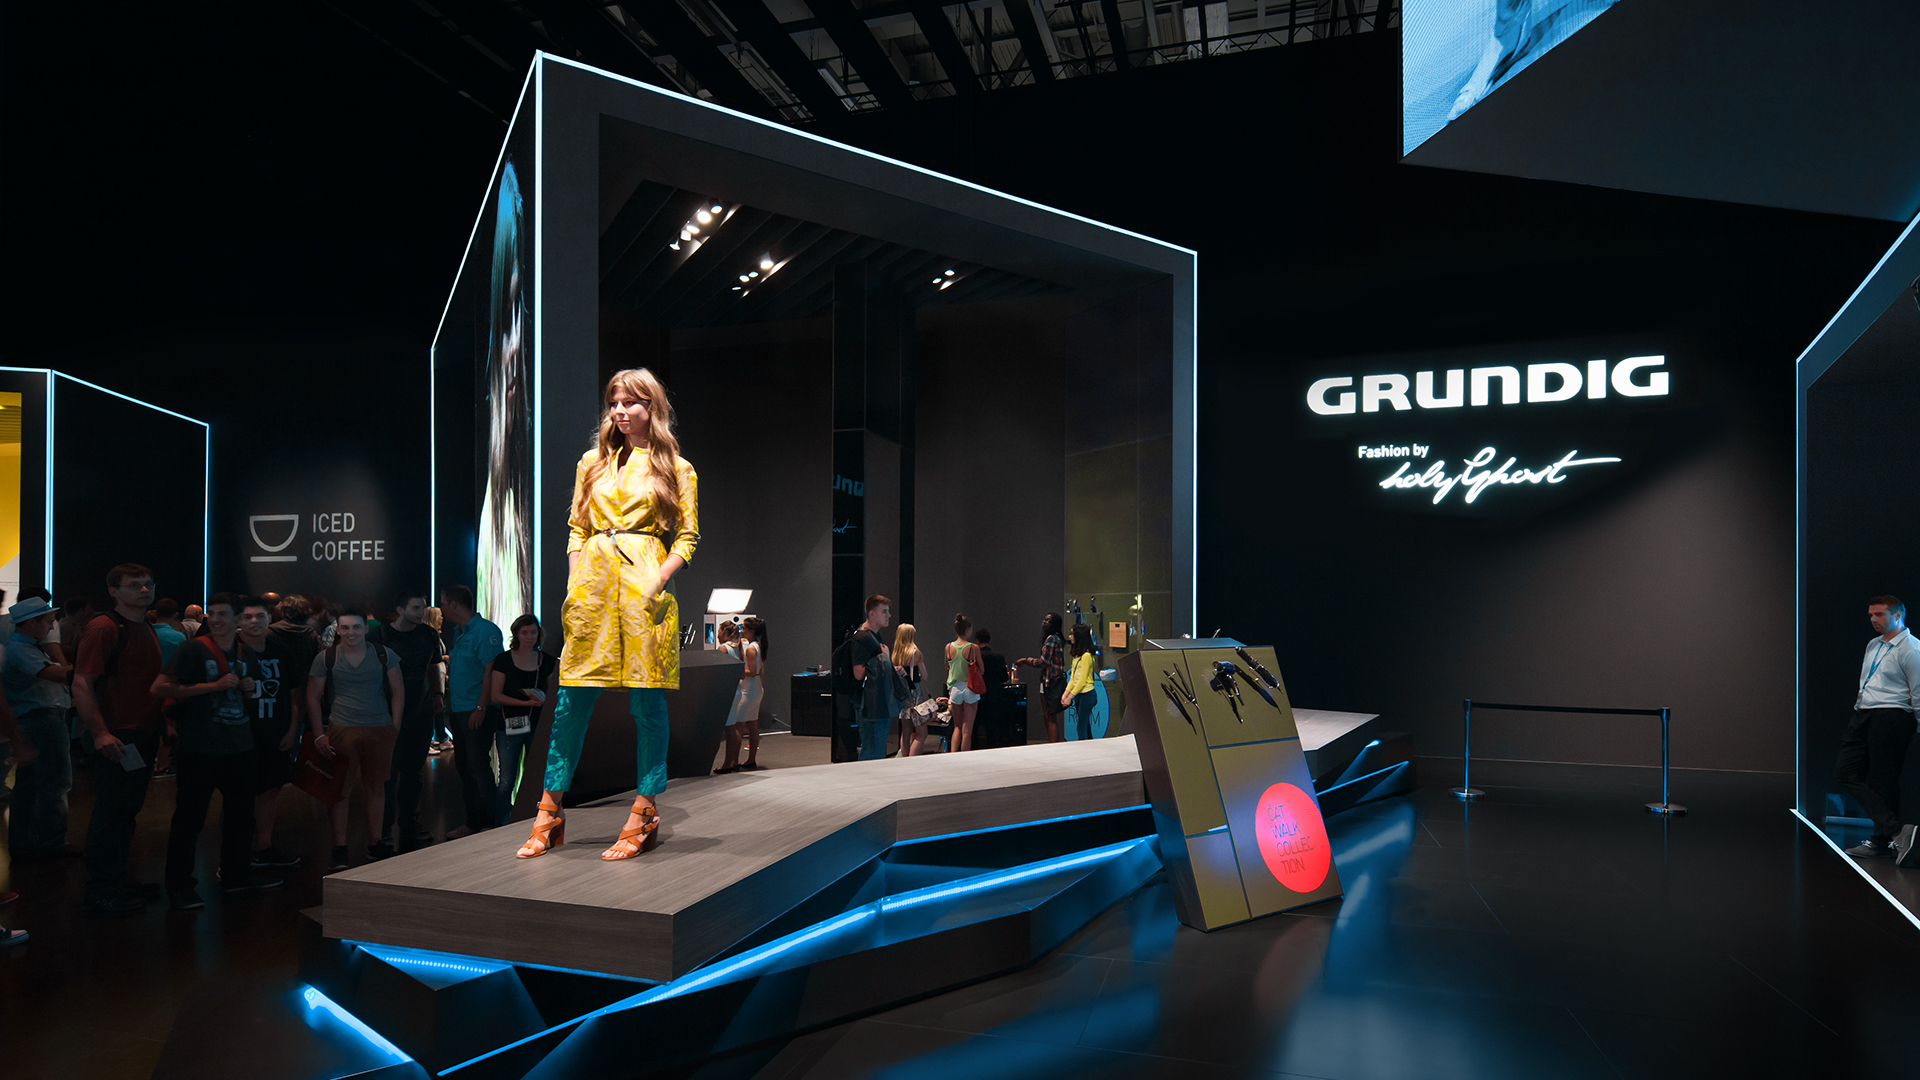 Dart stages the Grundig fair stand at the IFA 2014